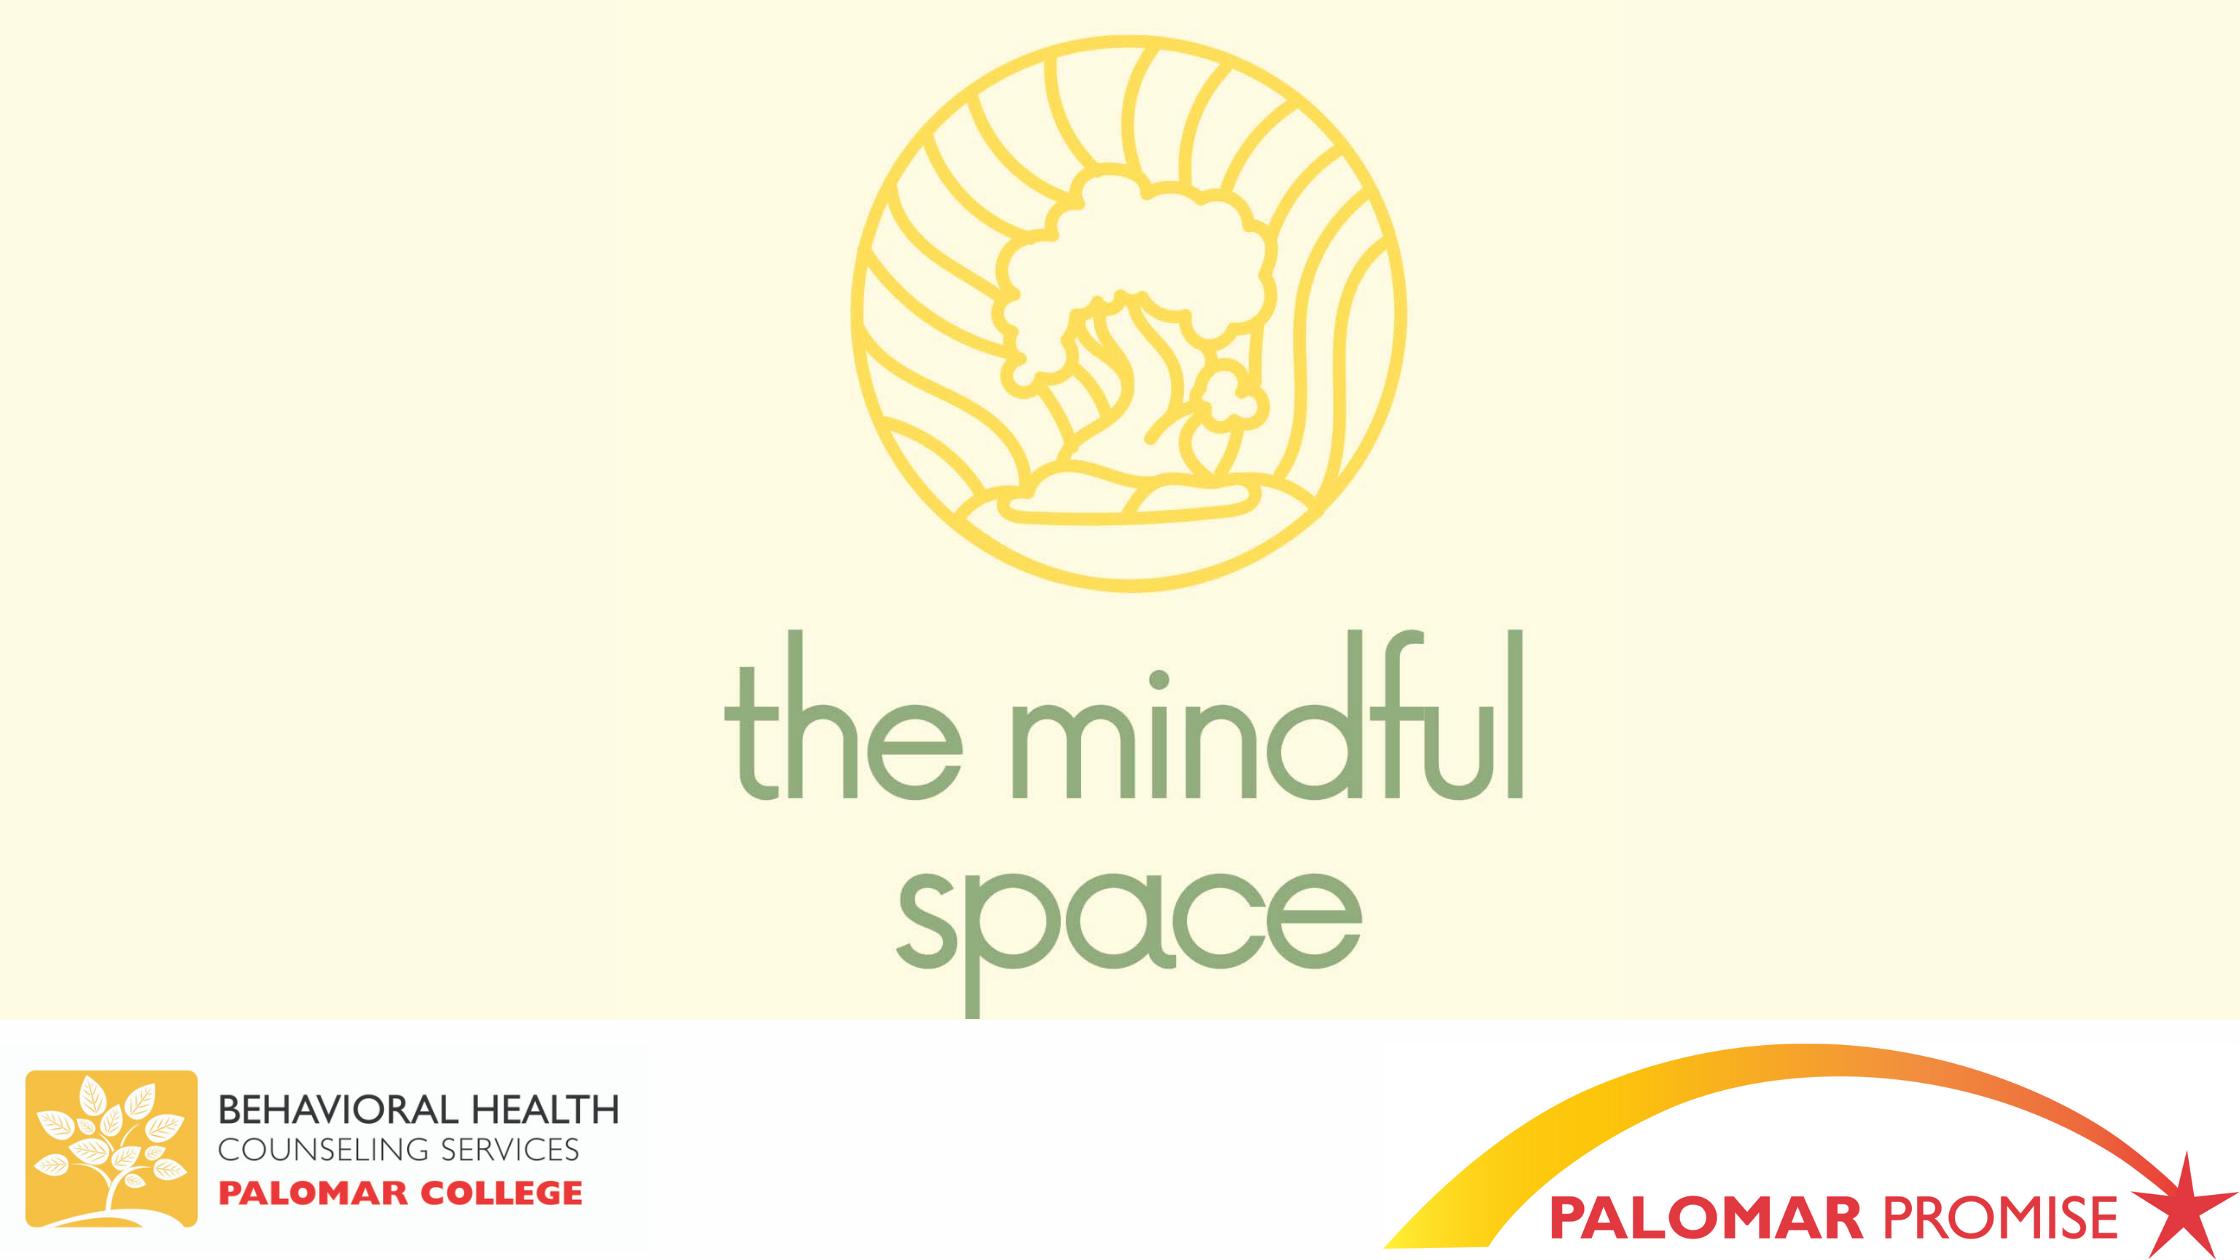 The Mindful Space